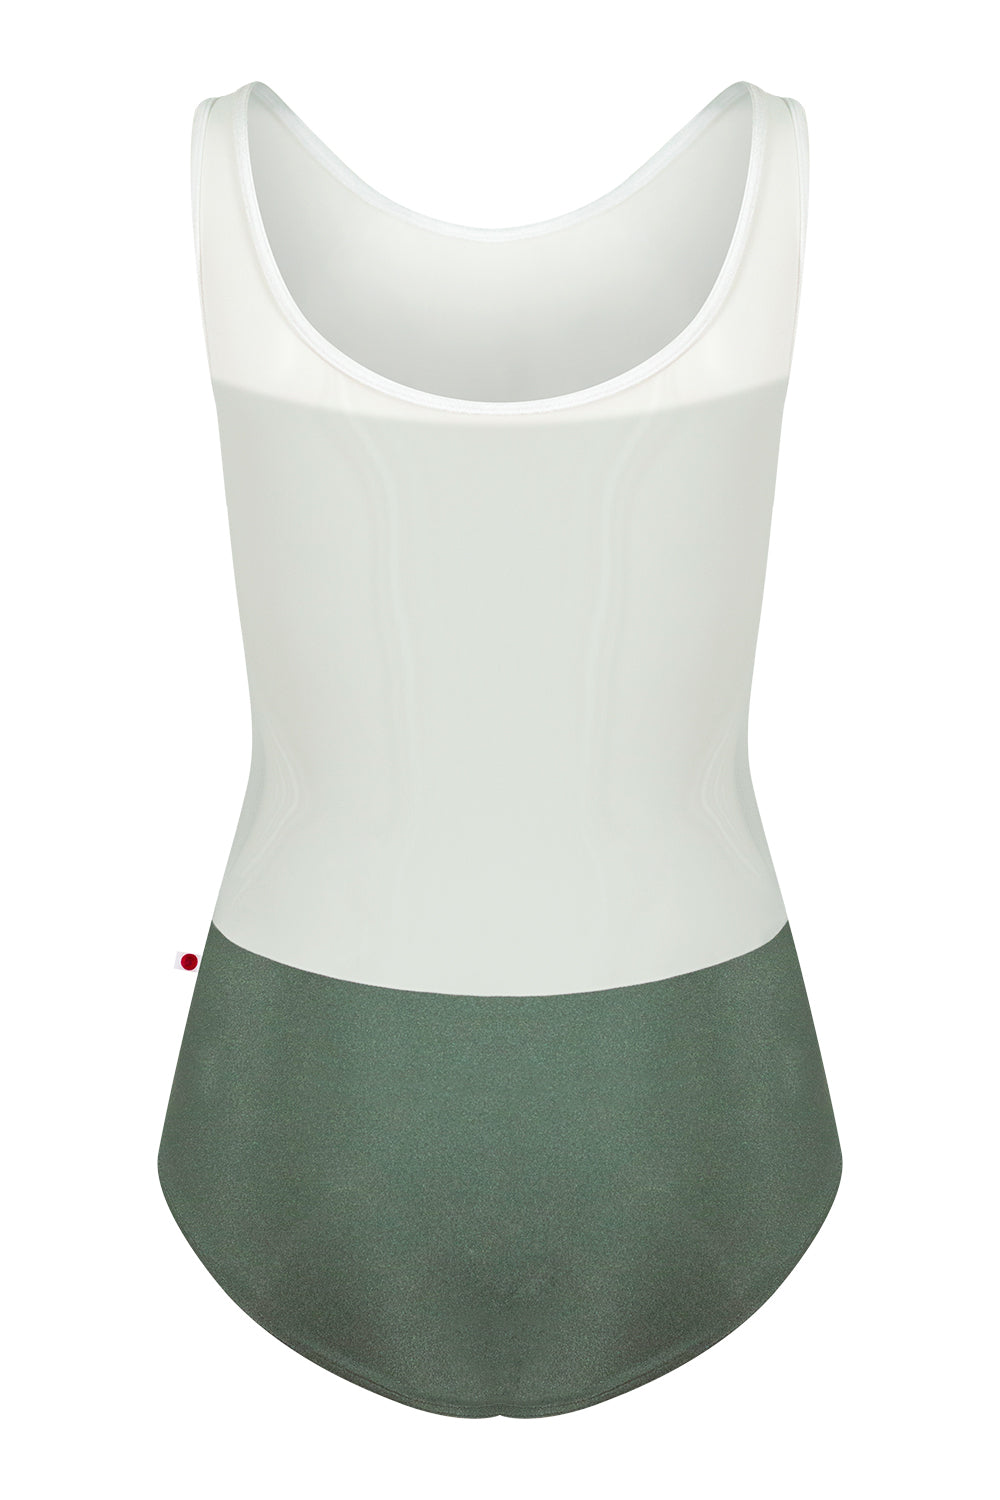 Meagan leotard in N-Sage body color with Mesh White top color and T-White trim color